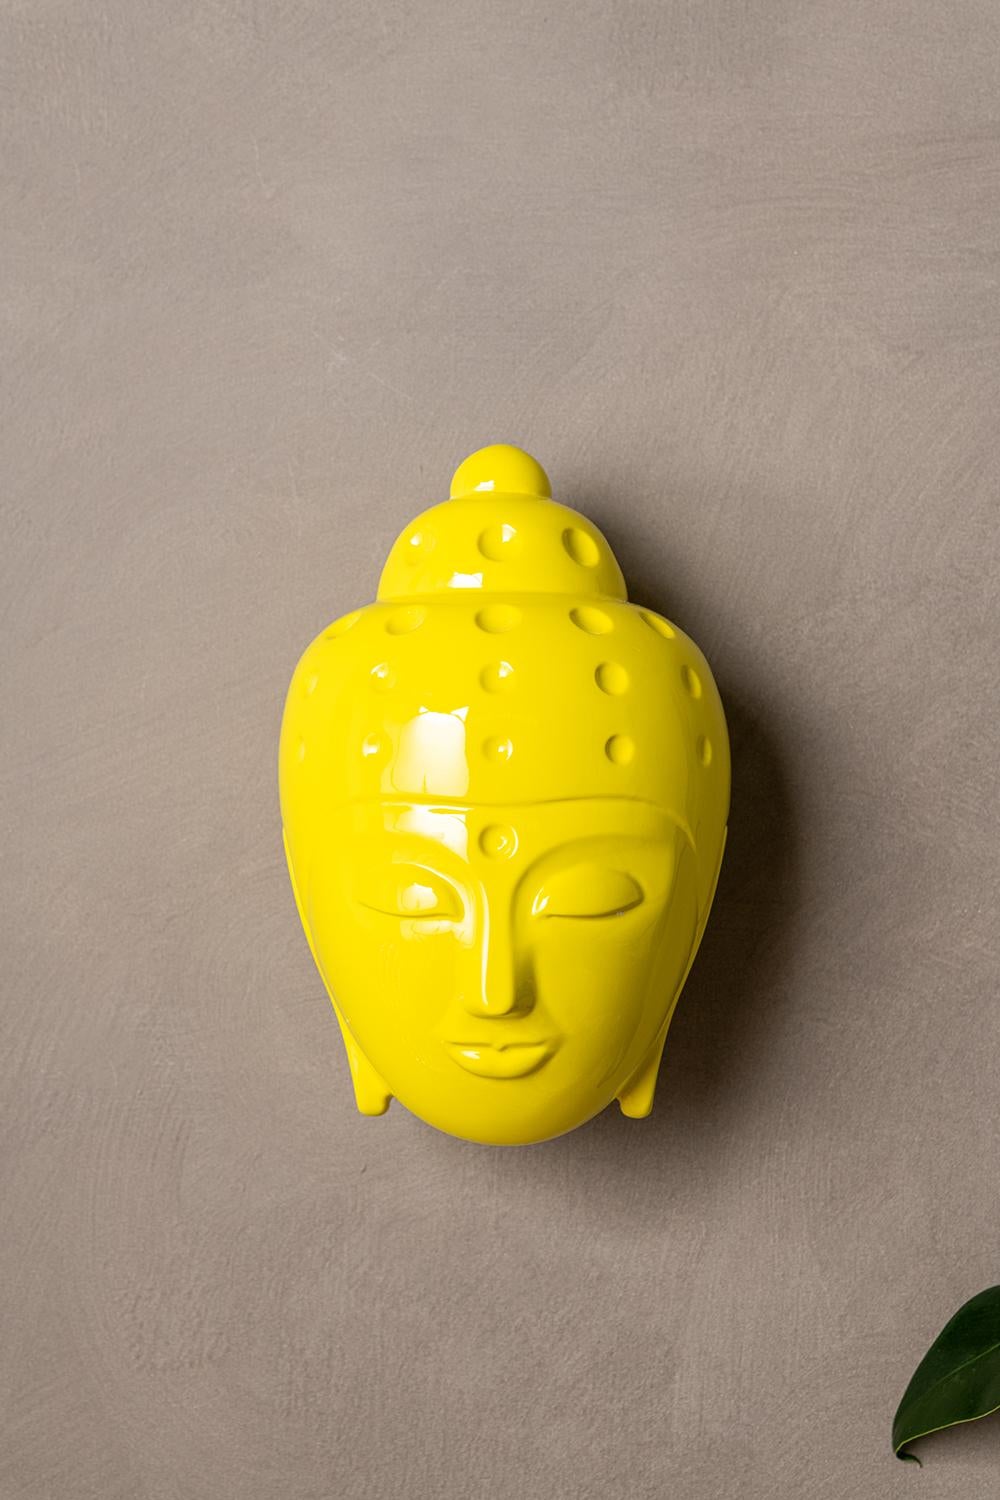 Tal Nehoray Figurative Sculpture - Contemporary buddha head sculpture - painted in yellow car paint